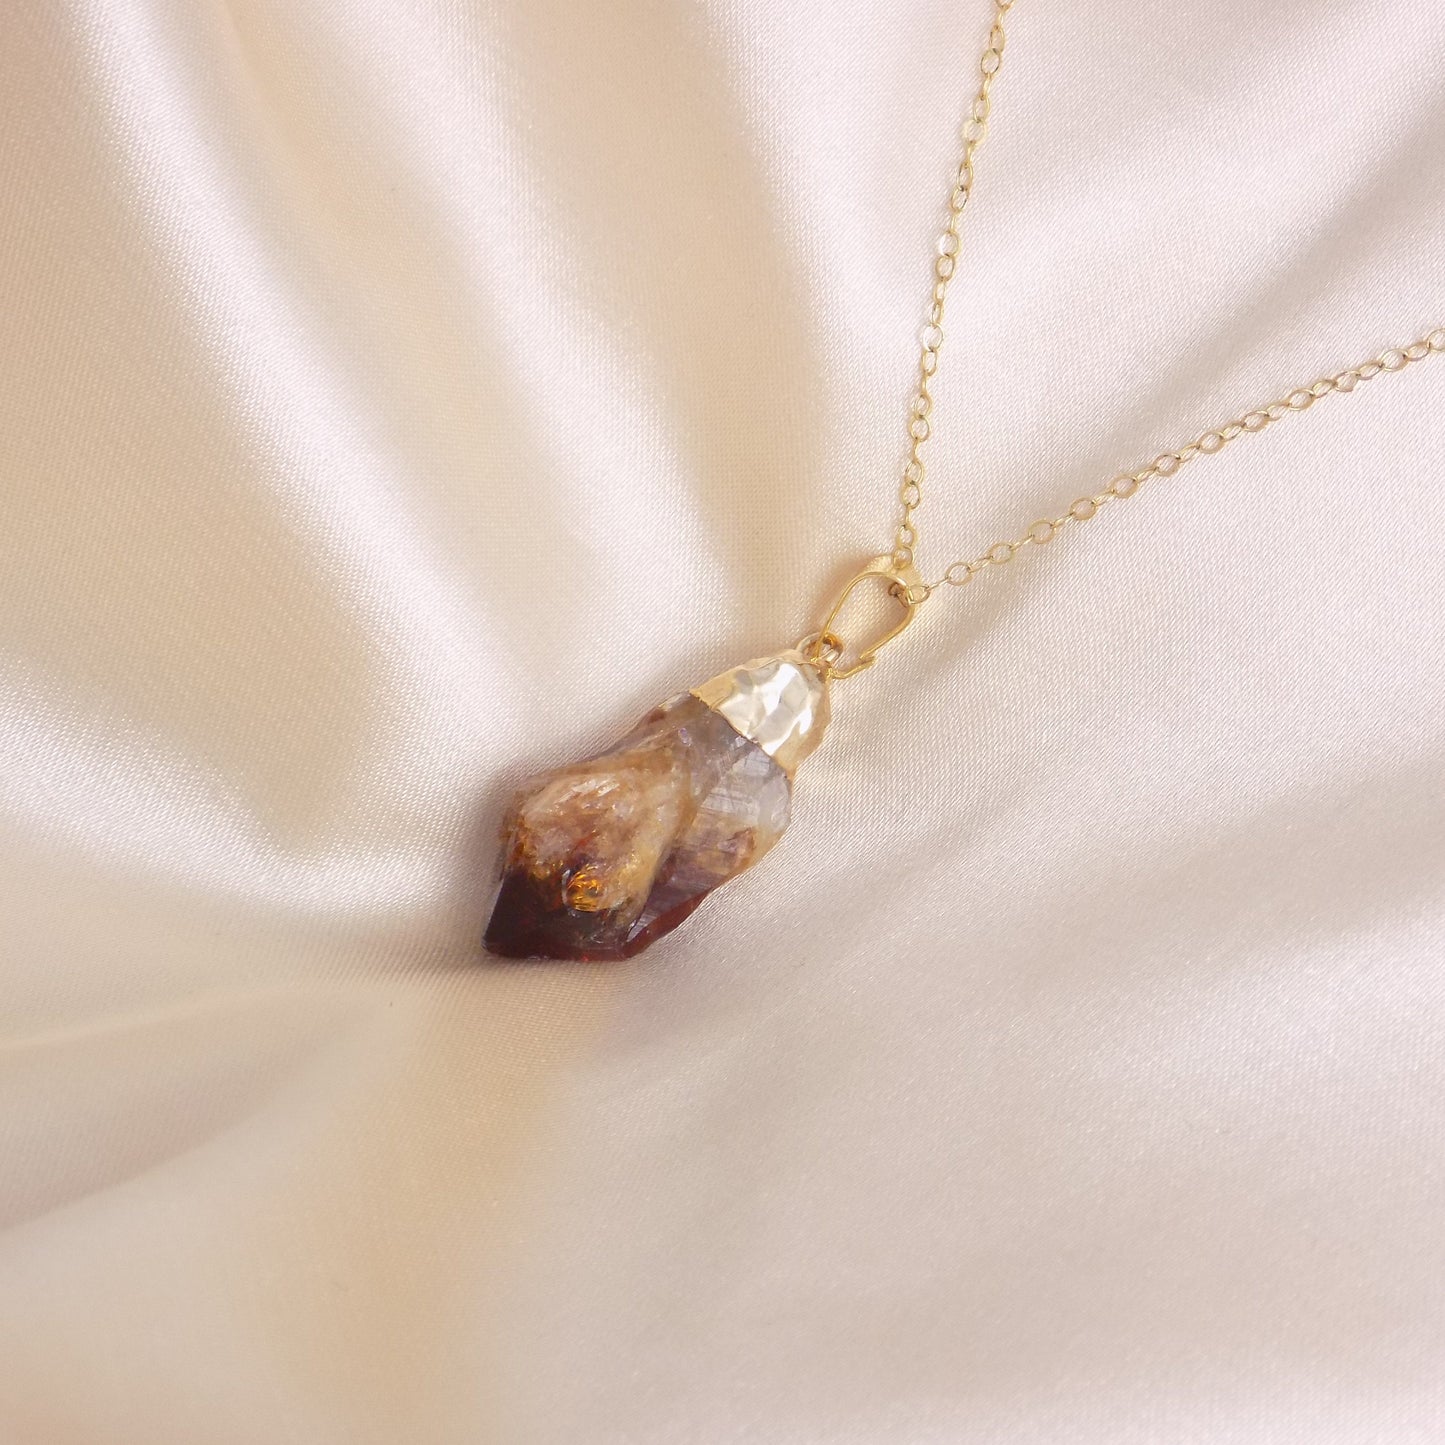 Brown Citrine Crystal Necklace Gold - November Birthstone Jewelry - Christmas Gift For Her - G15-248